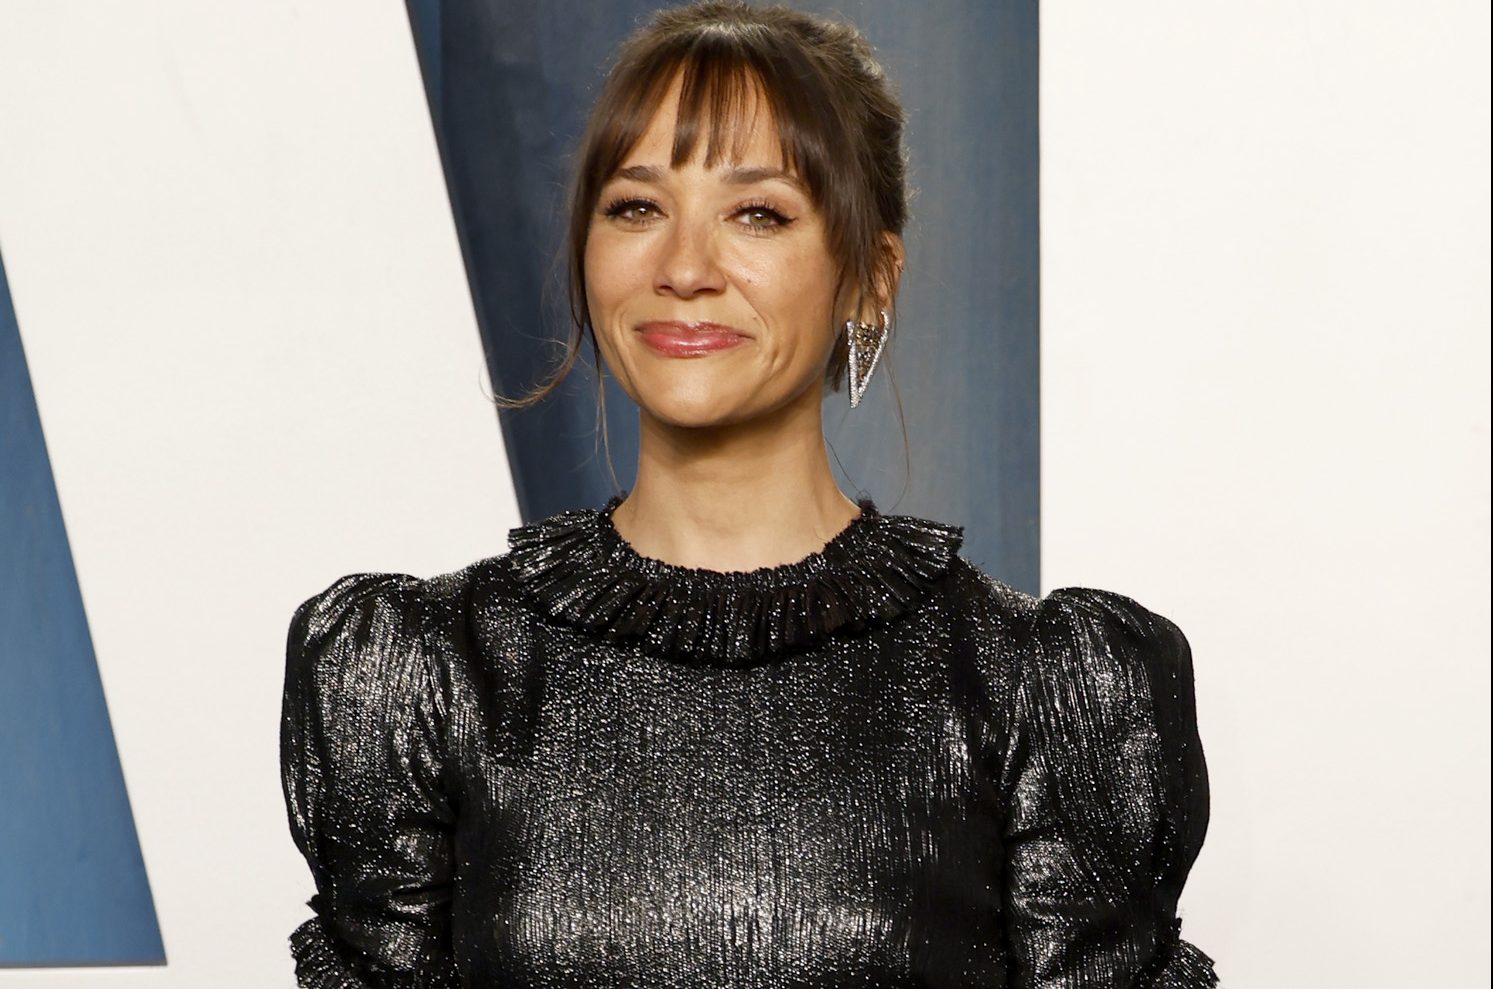 actress-rashida-jones-is-offering-her-west-hollywood-home-for-$11,000-a-month